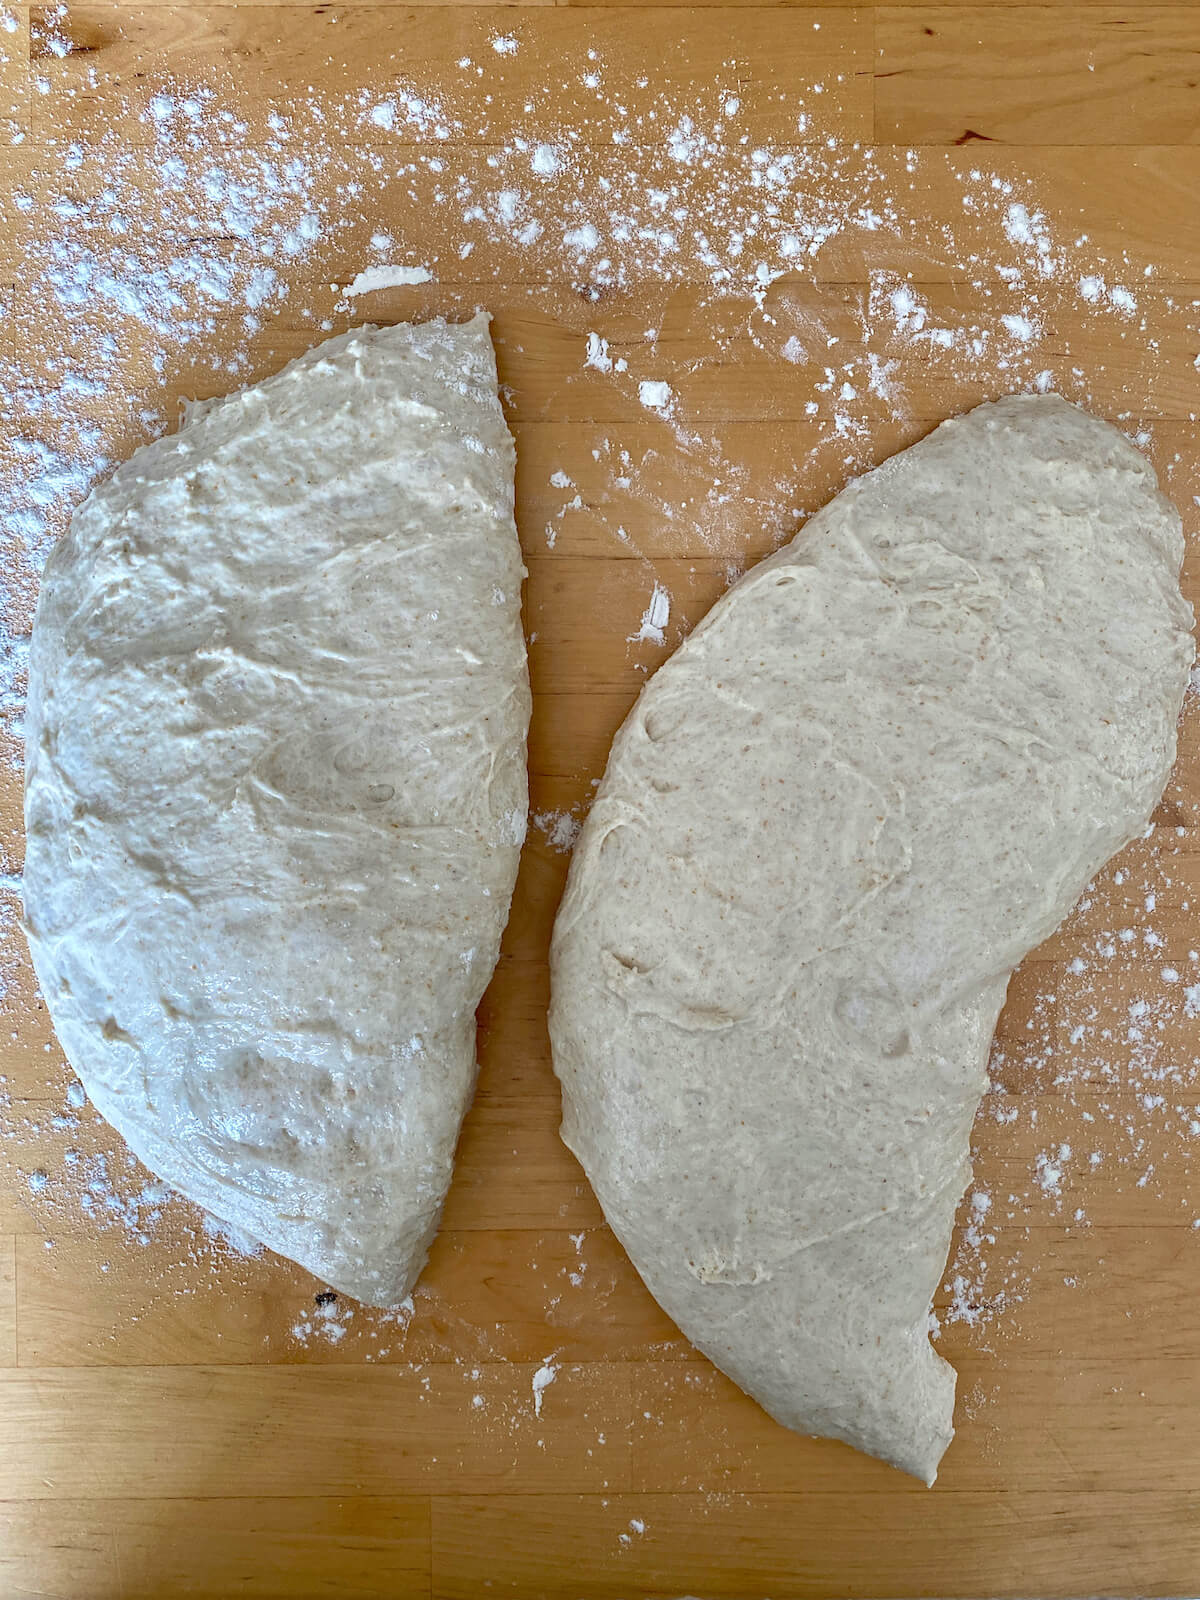 The pizza dough divided into two pieces on a countertop.